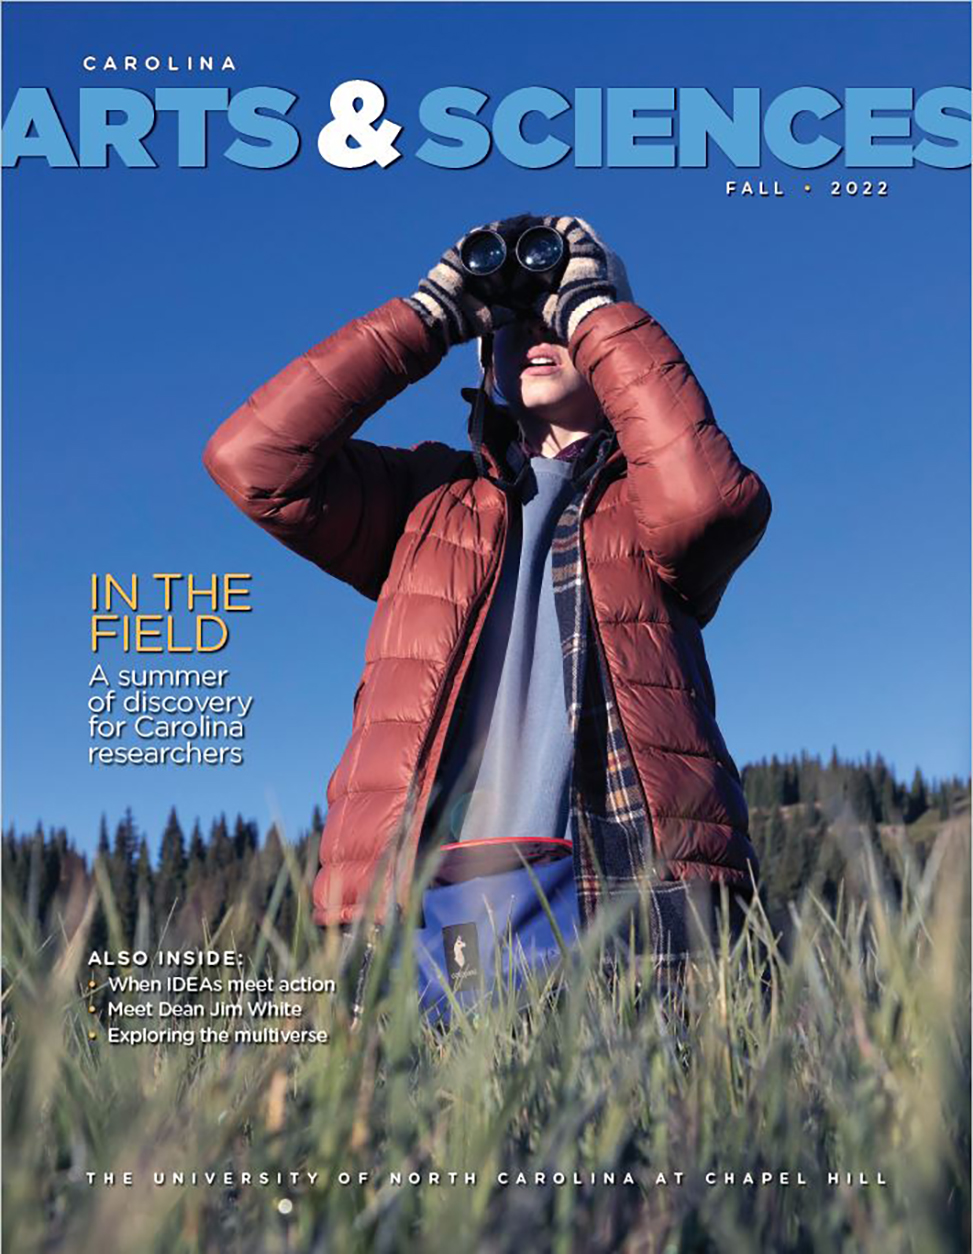 Cover of fall 2022 magazine shows a young woman researcher holding binoculars and looking up into the sky. She is standing in a field.